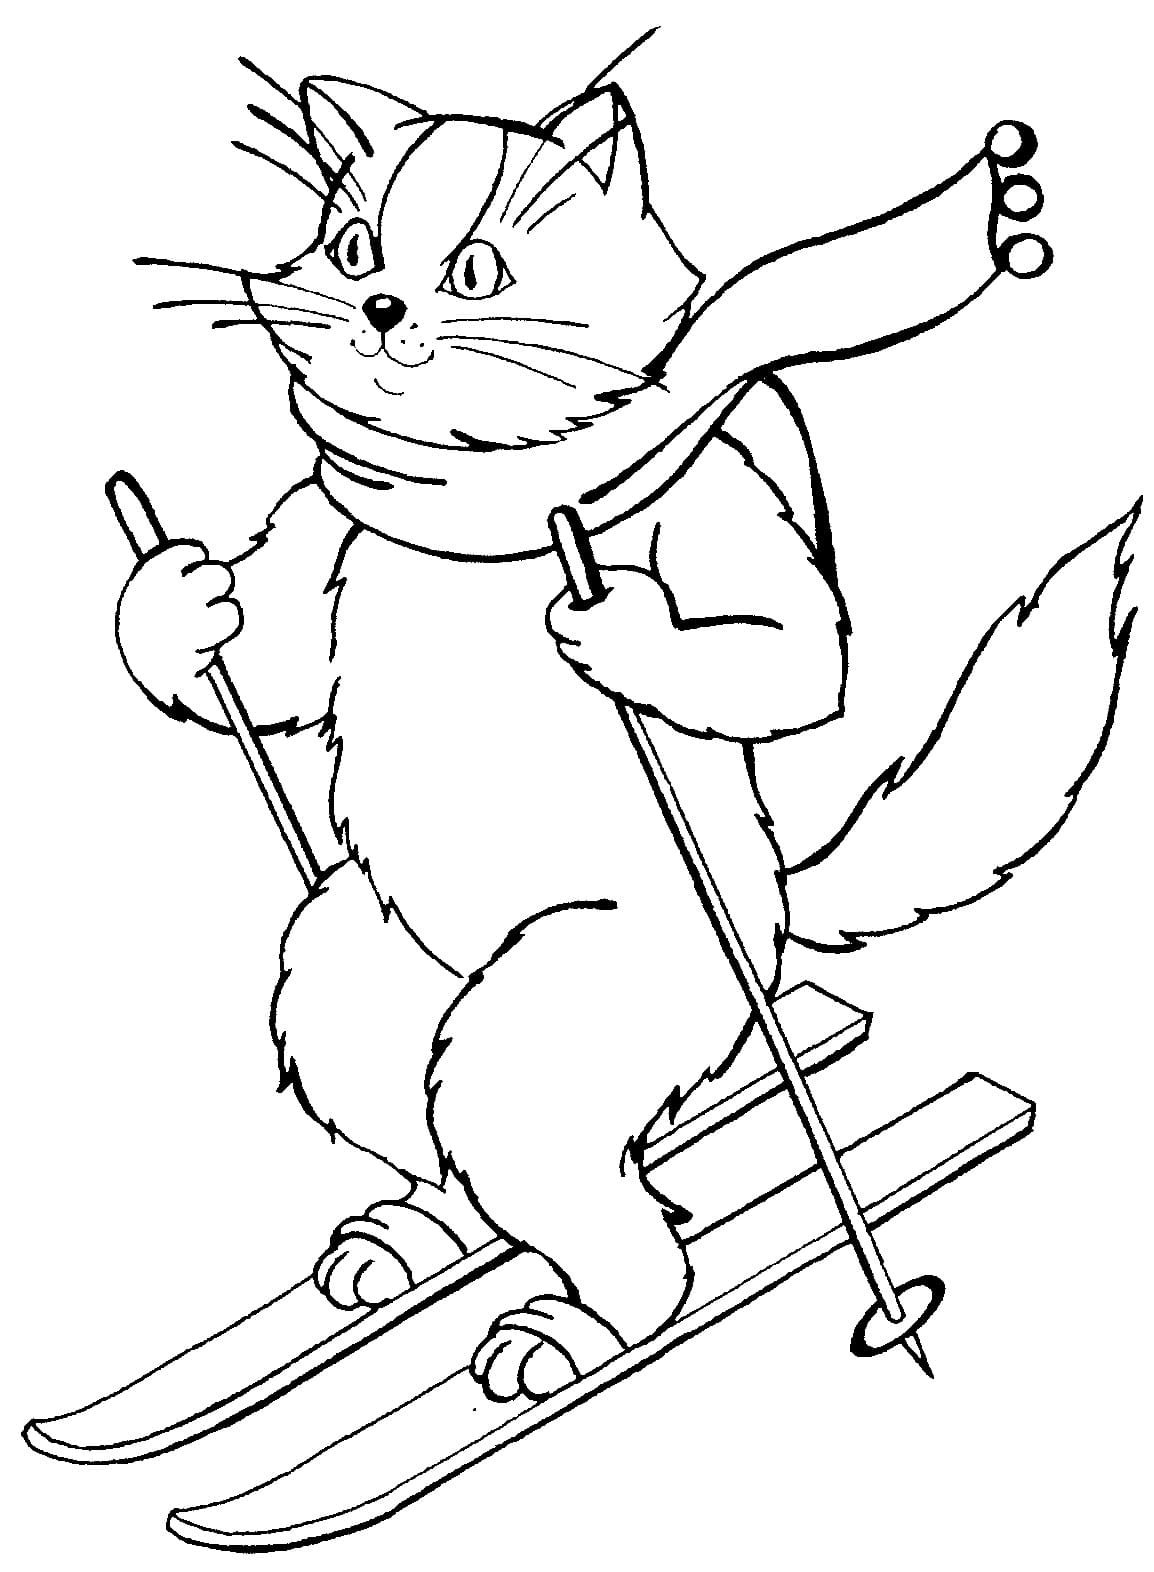 Skiing Coloring Pages Printable for Free Download